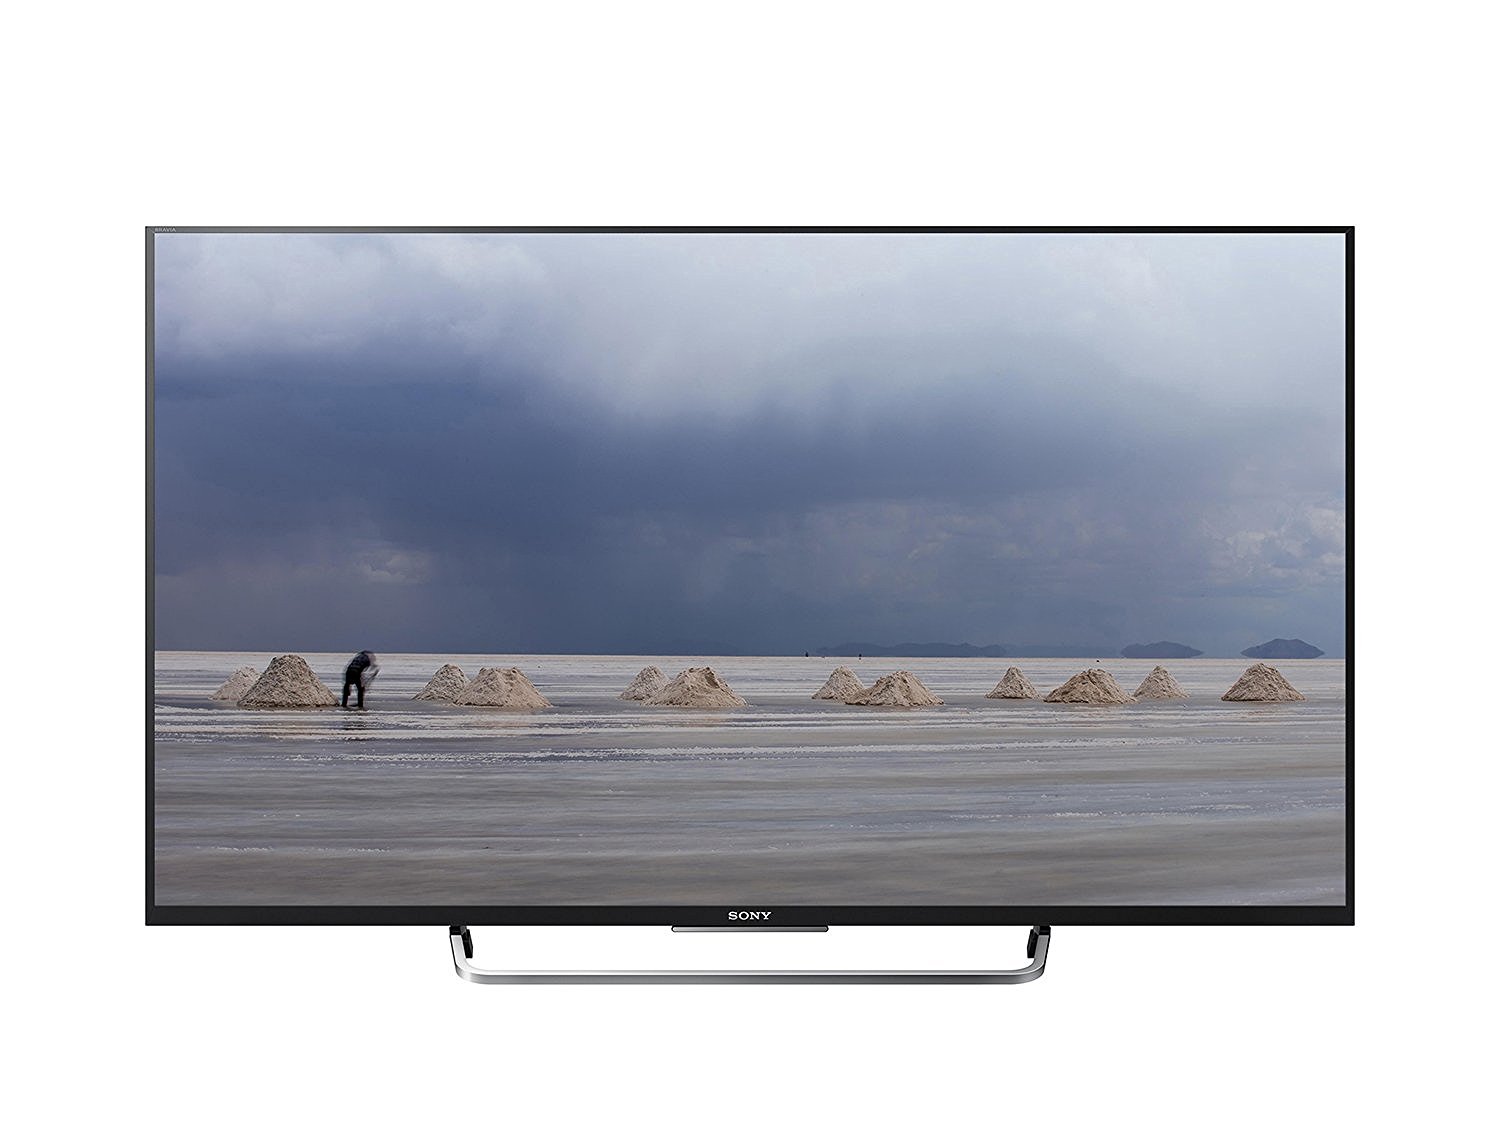 Sony 50 Inch Led Tv Price , HD Wallpaper & Backgrounds